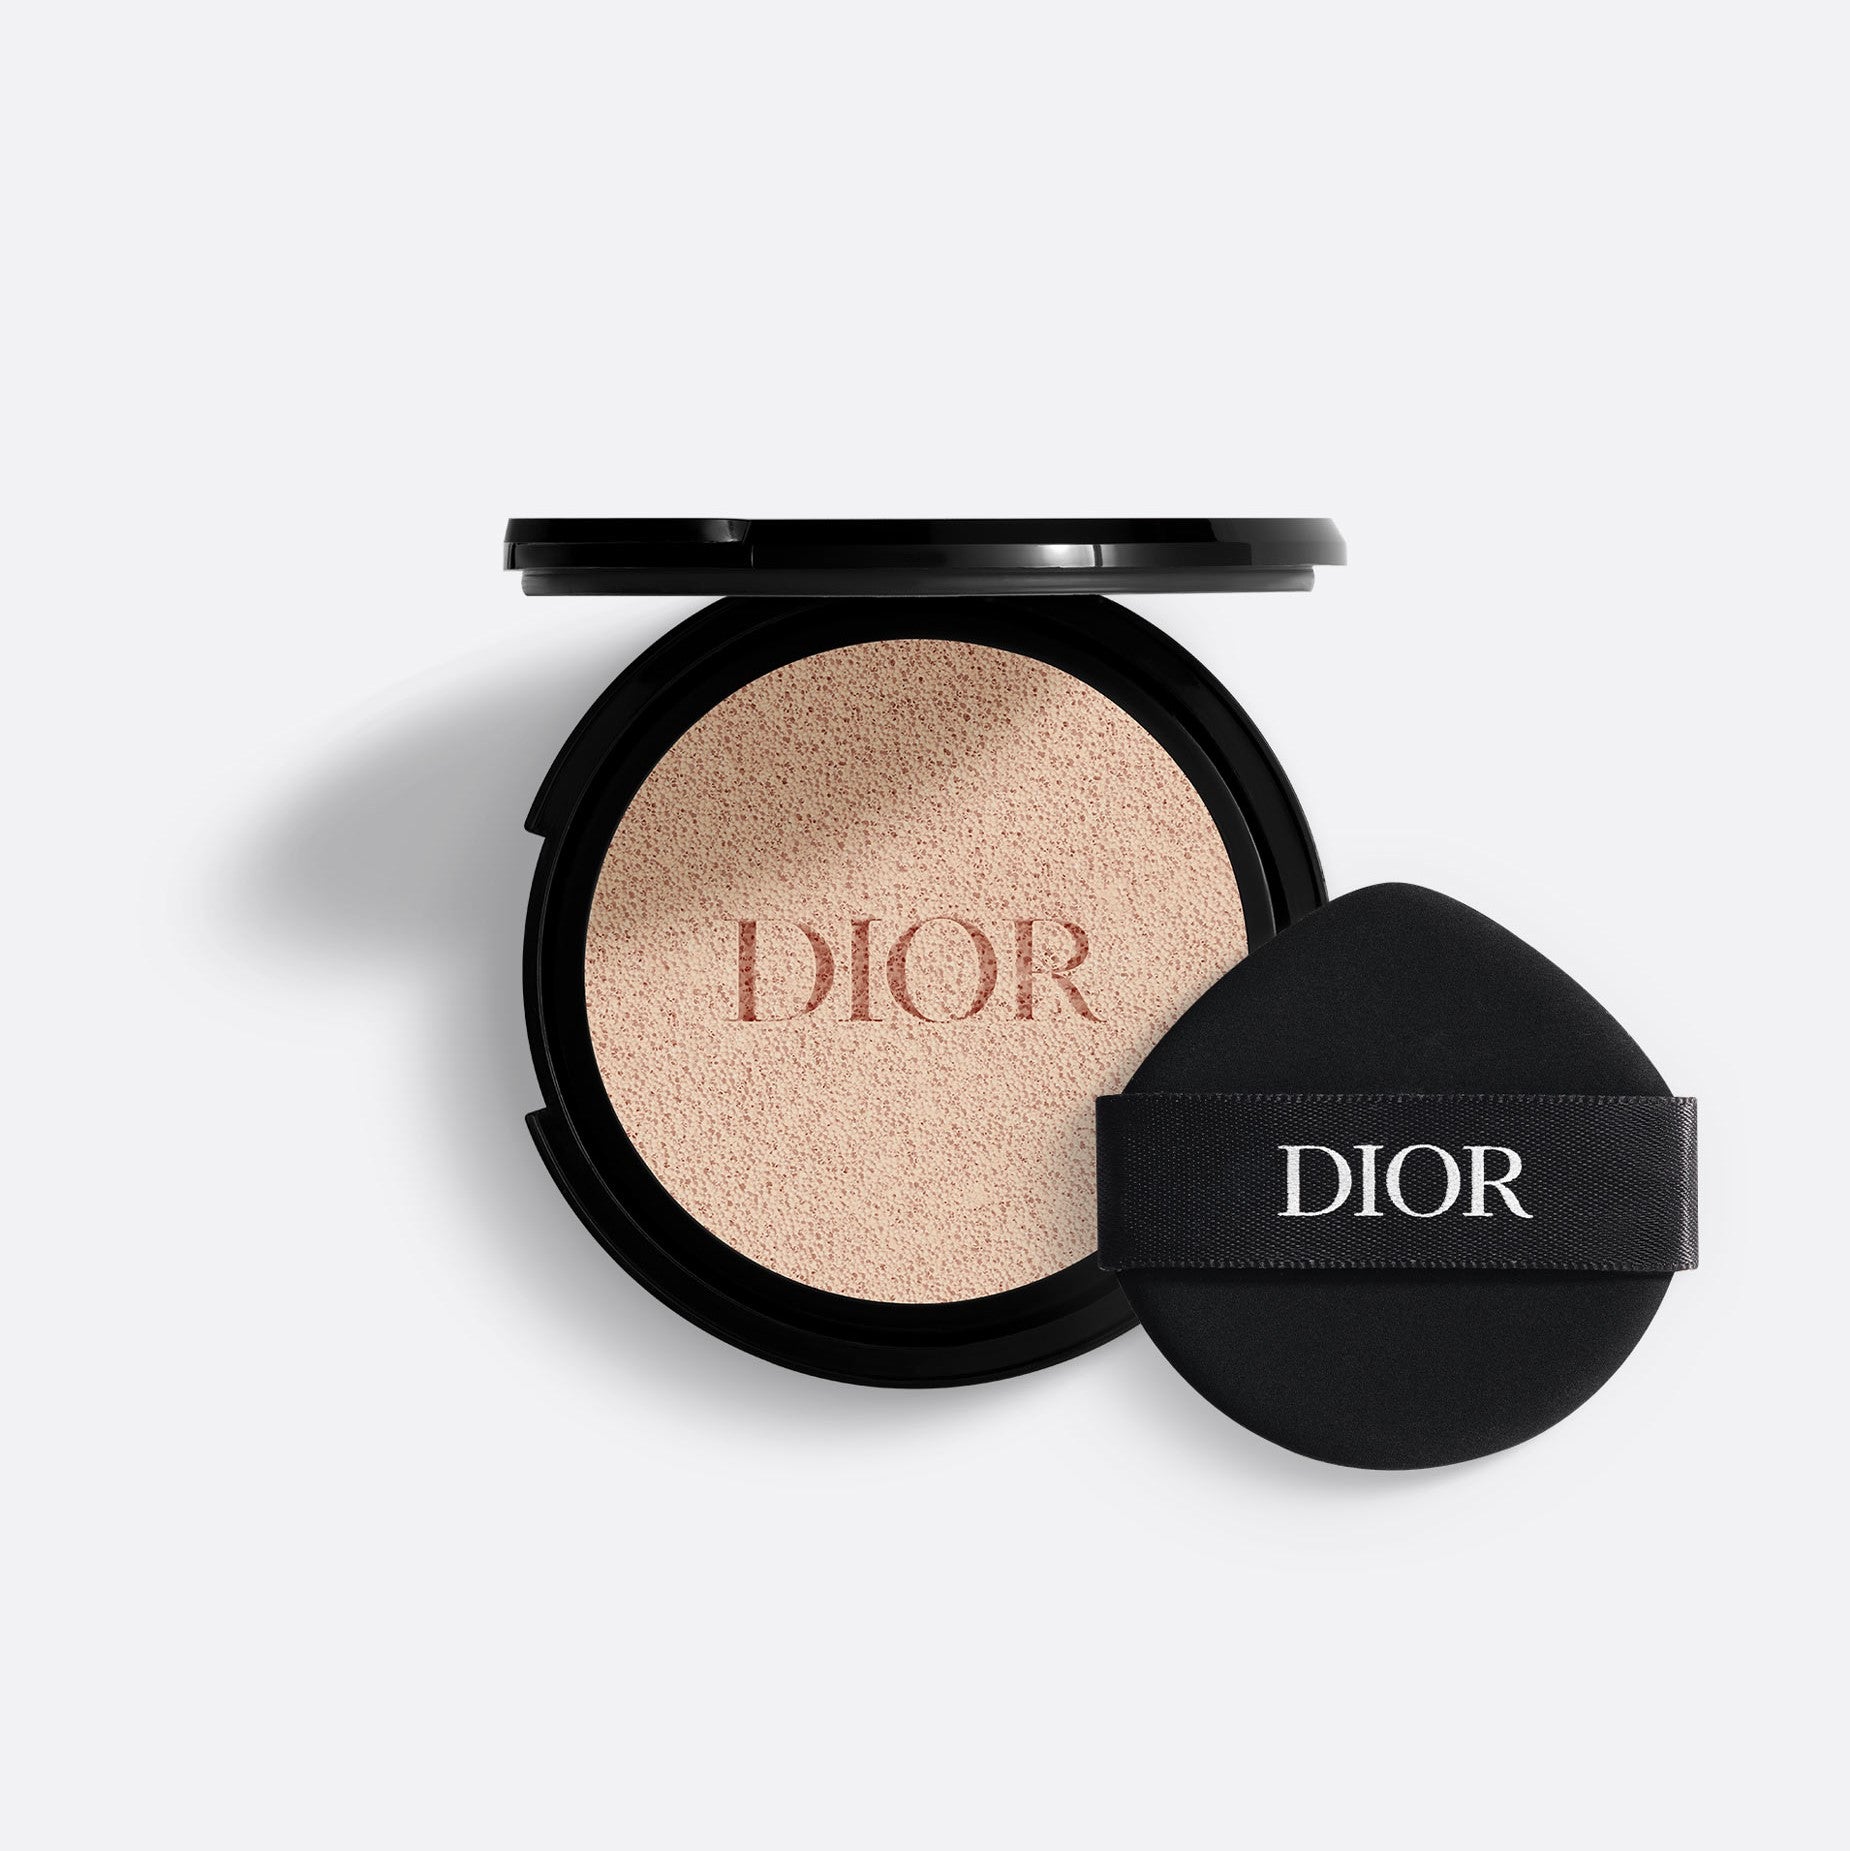 DIOR FOREVER CUSHION REFILL | Cushion Foundation Refill - No-Transfer Matte - 24h Wear and High Perfection